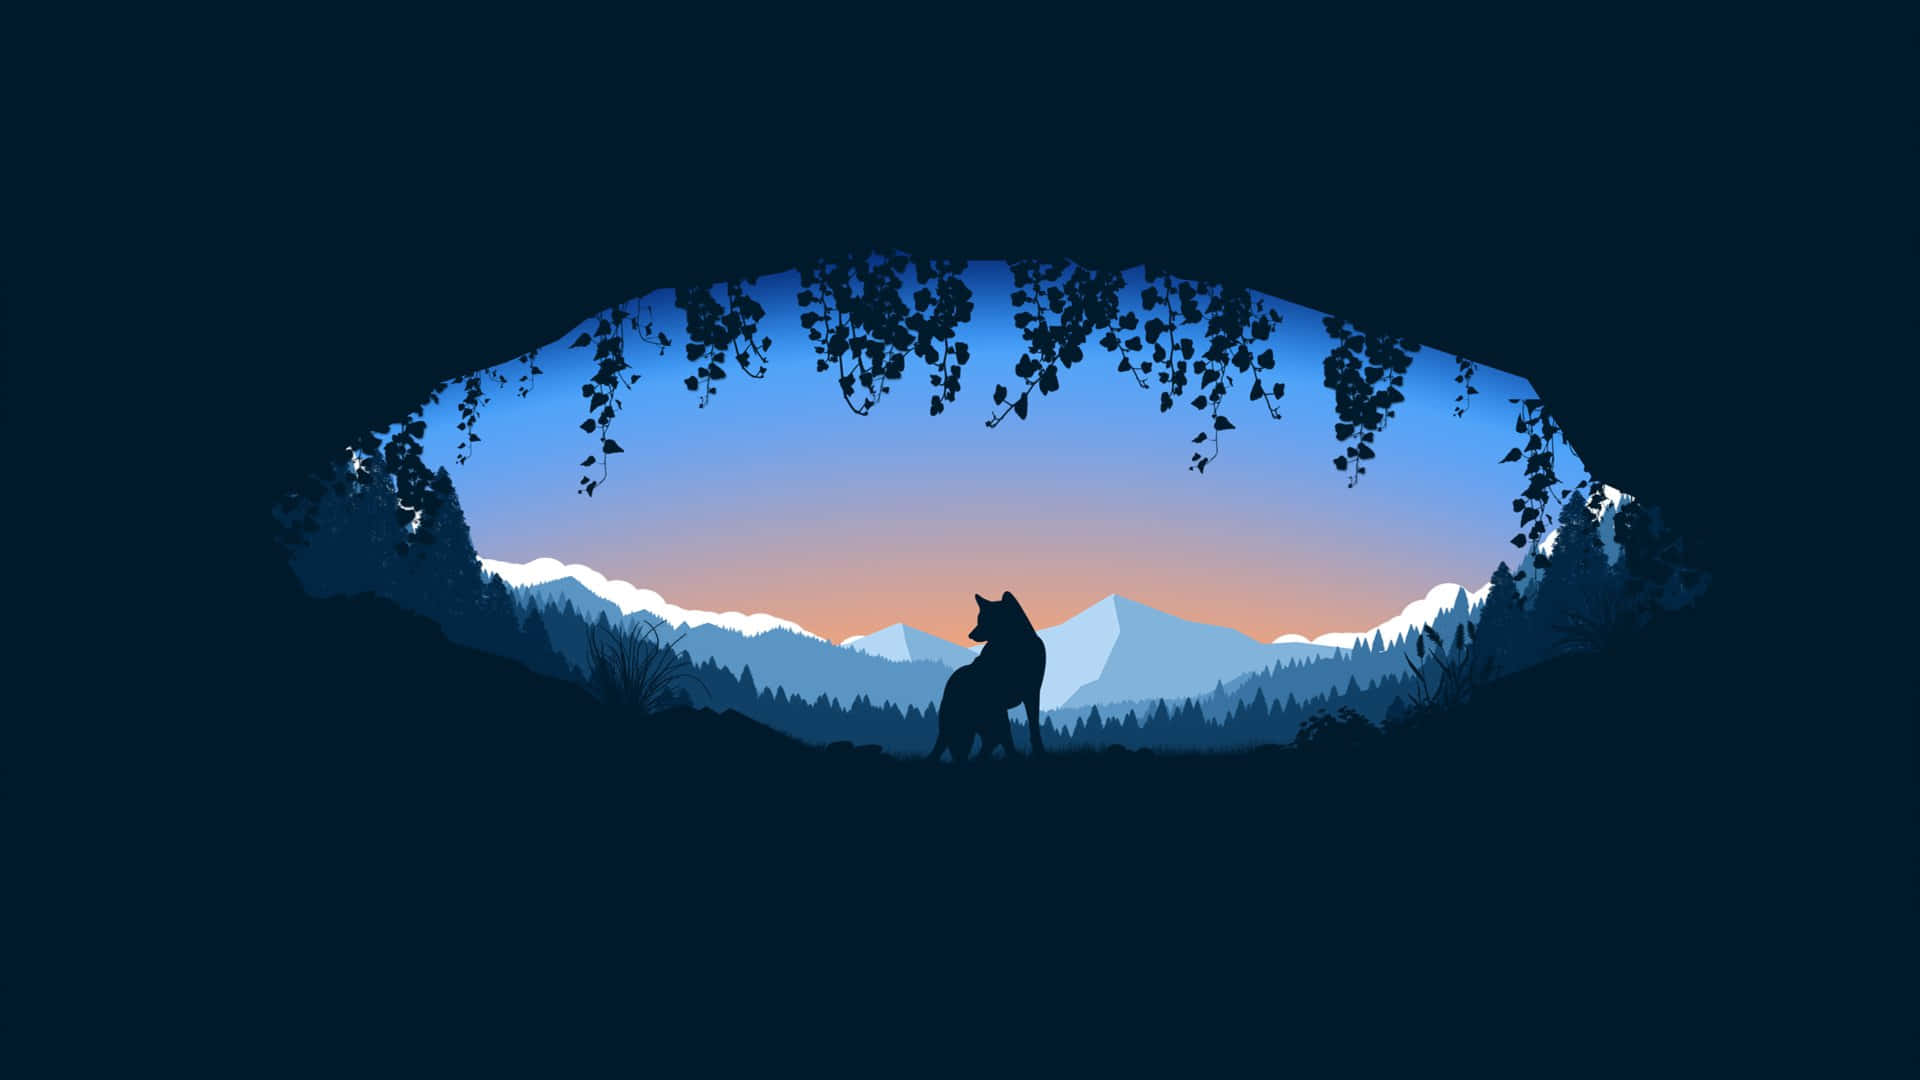 A Silhouette Of A Wolf In The Mountains